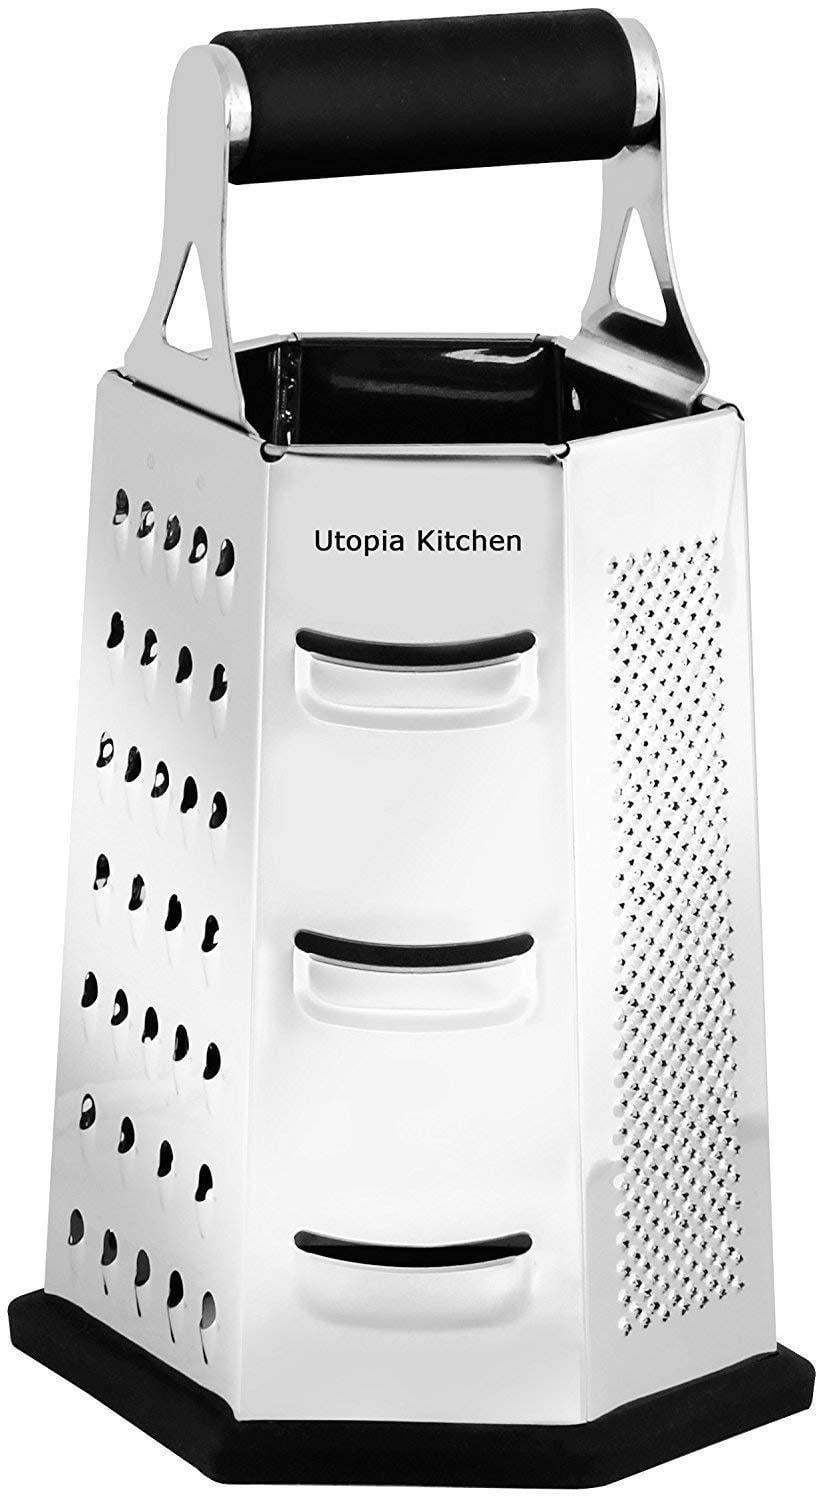 Rubber Handle Non Slip Rubber Bottom by Utopia Kitchen Cheese-Grater-Vegetable-Slicer Stainless Steel 9.5 Inch Height 6-sides 